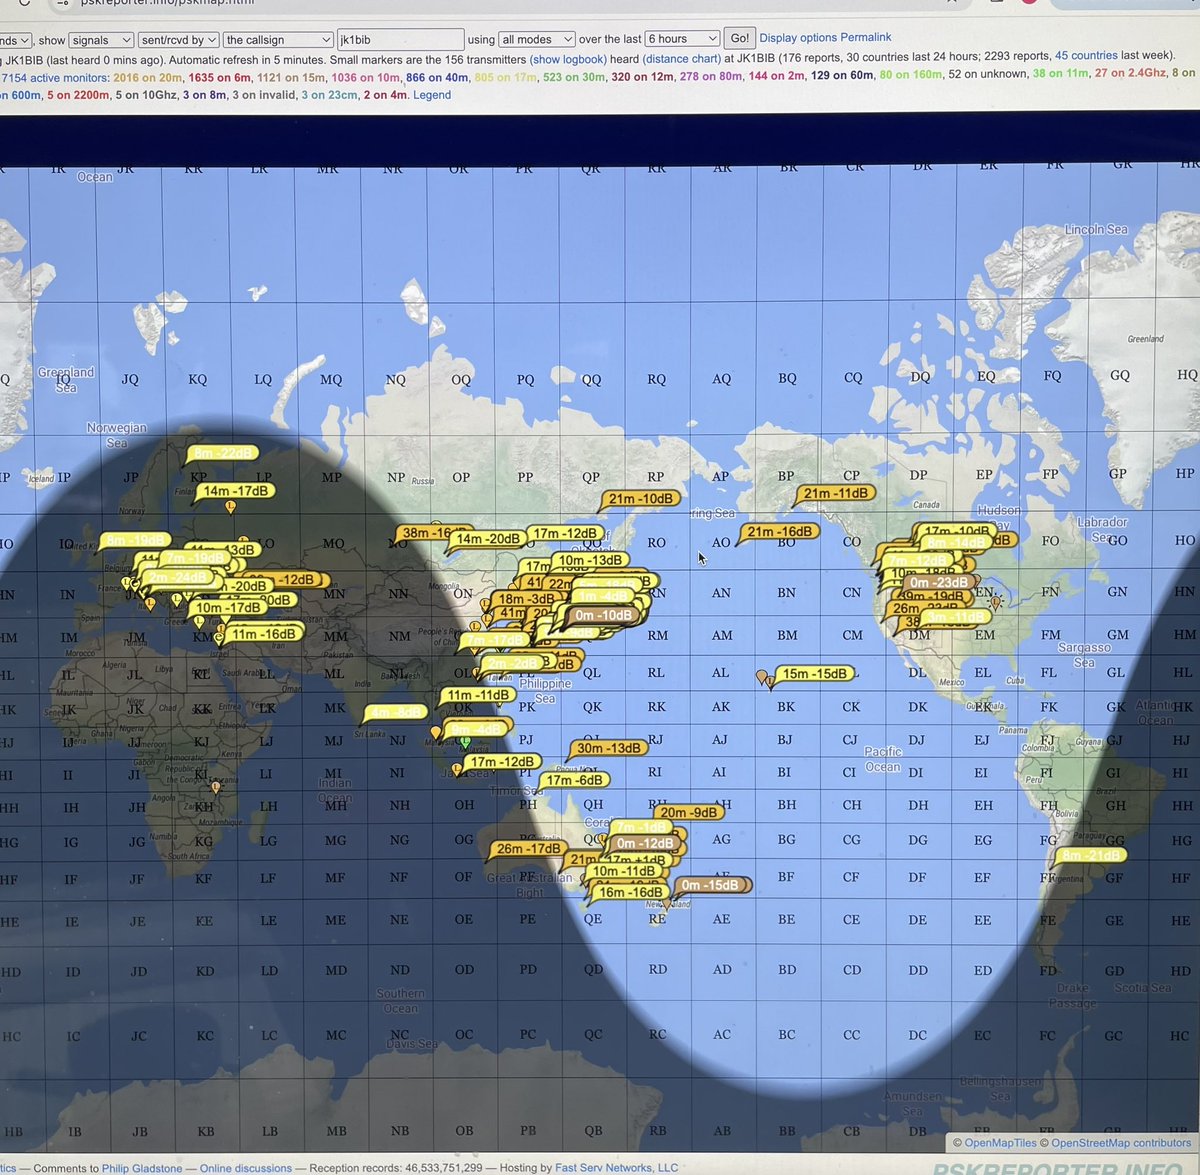 Propagation is back after the extreme geomagnetic storm last weekend. Map shows my 100w signal getting out this morning on 20m, 17m, and 15m bands. #AmateurRadio